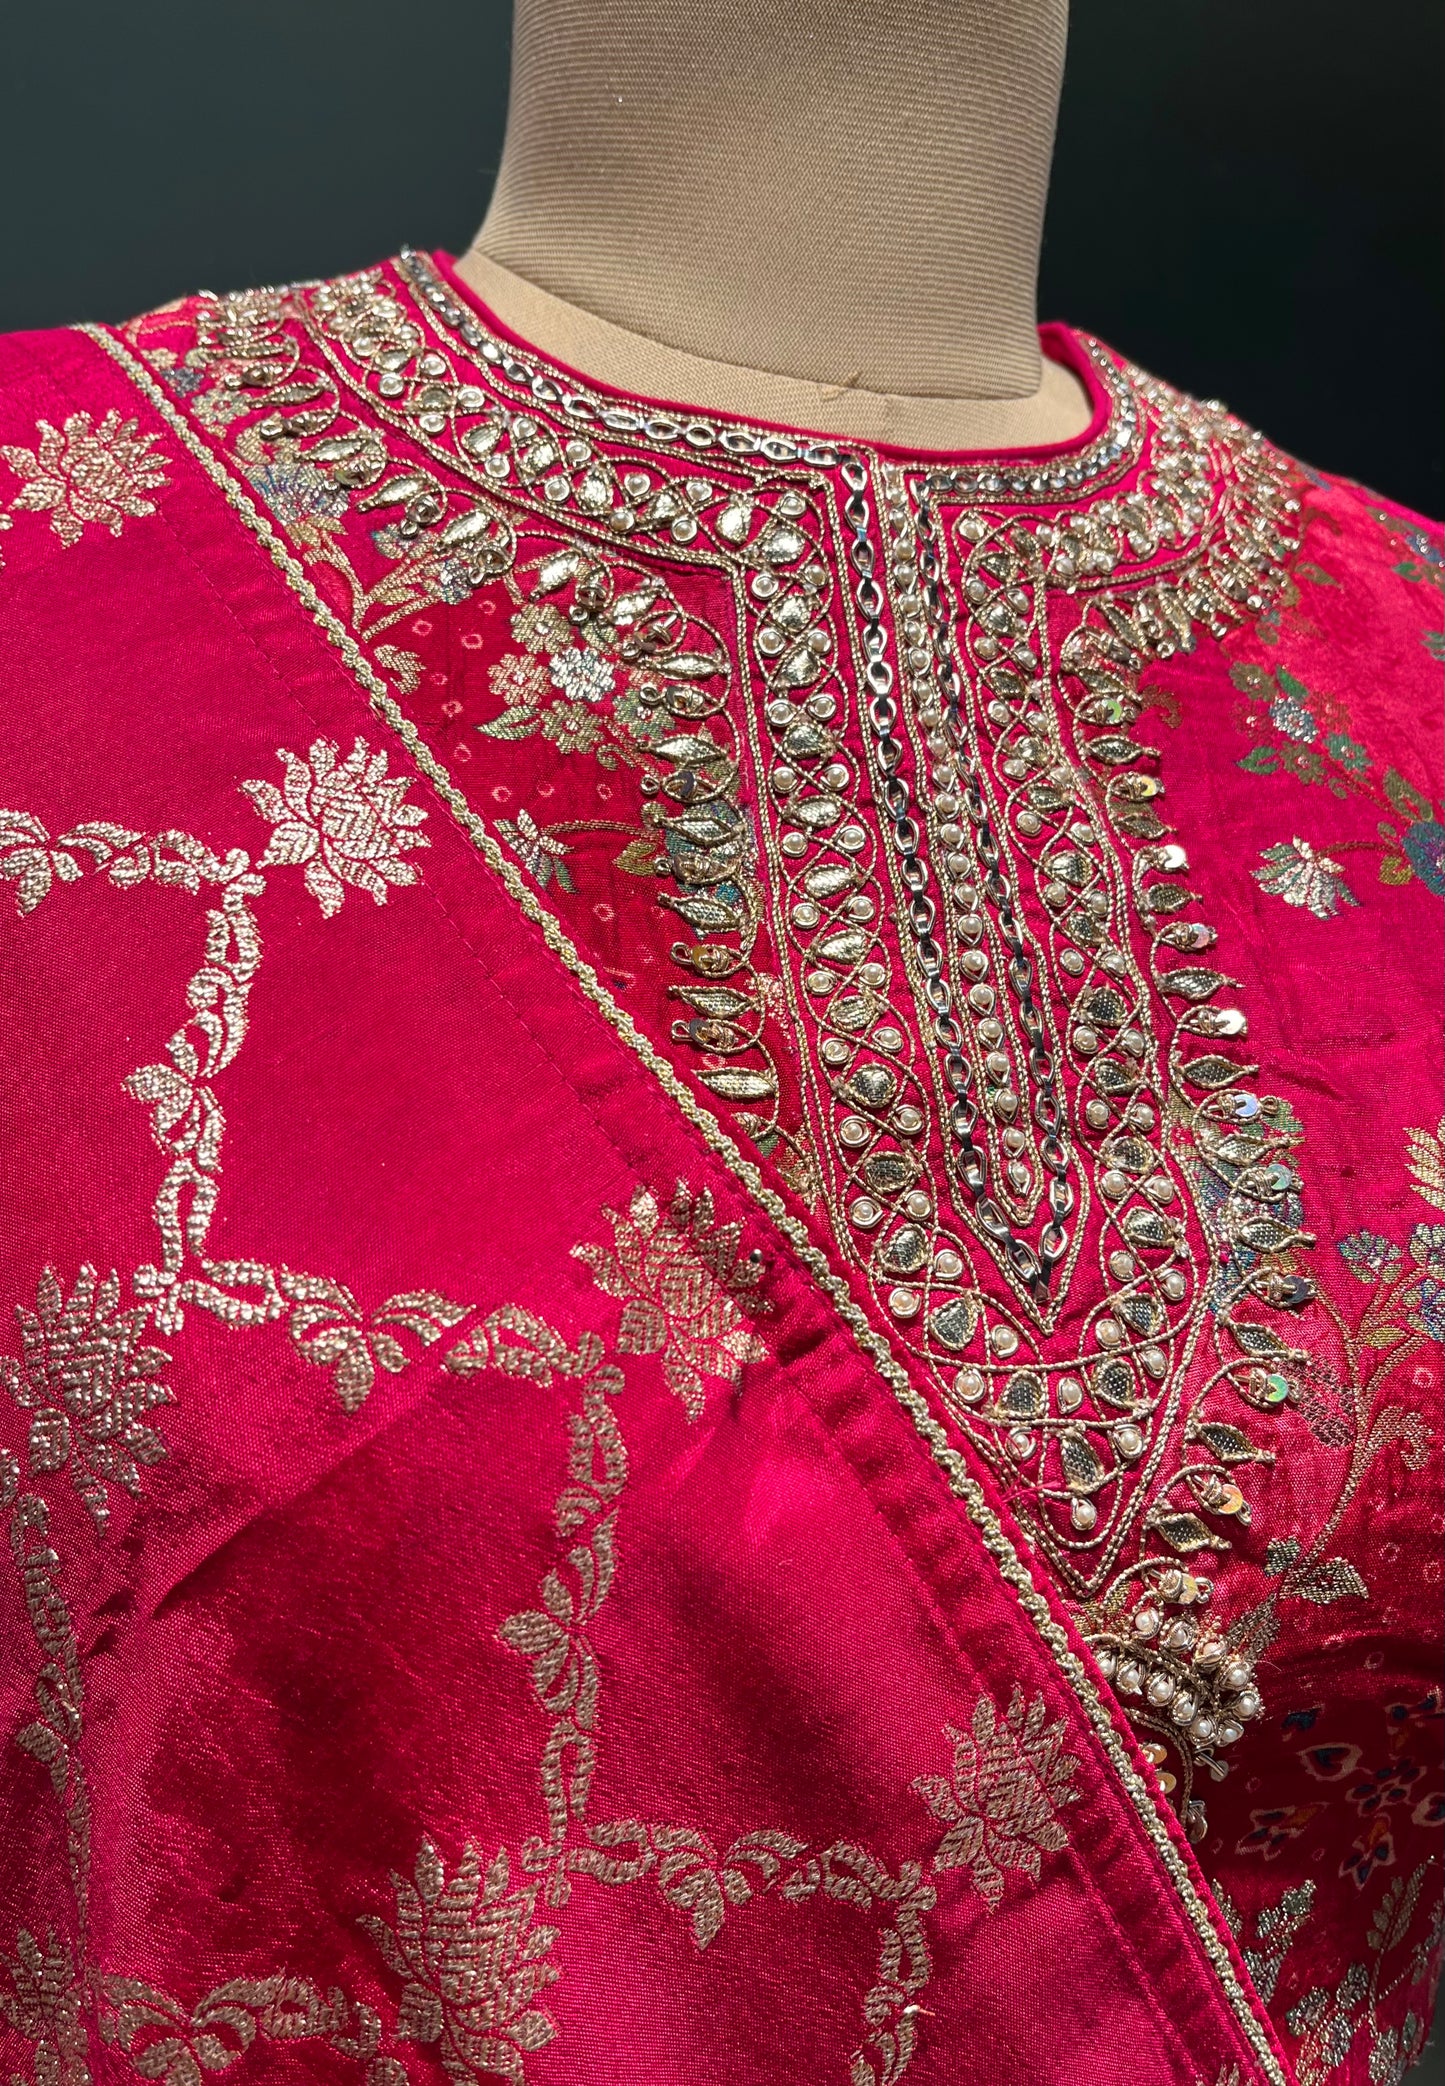 HOT PINK COLOUR DOLA SILK SAREE WITH READYMADE BLOUSE EMBELLISHED WITH GOTA PATTI WORK